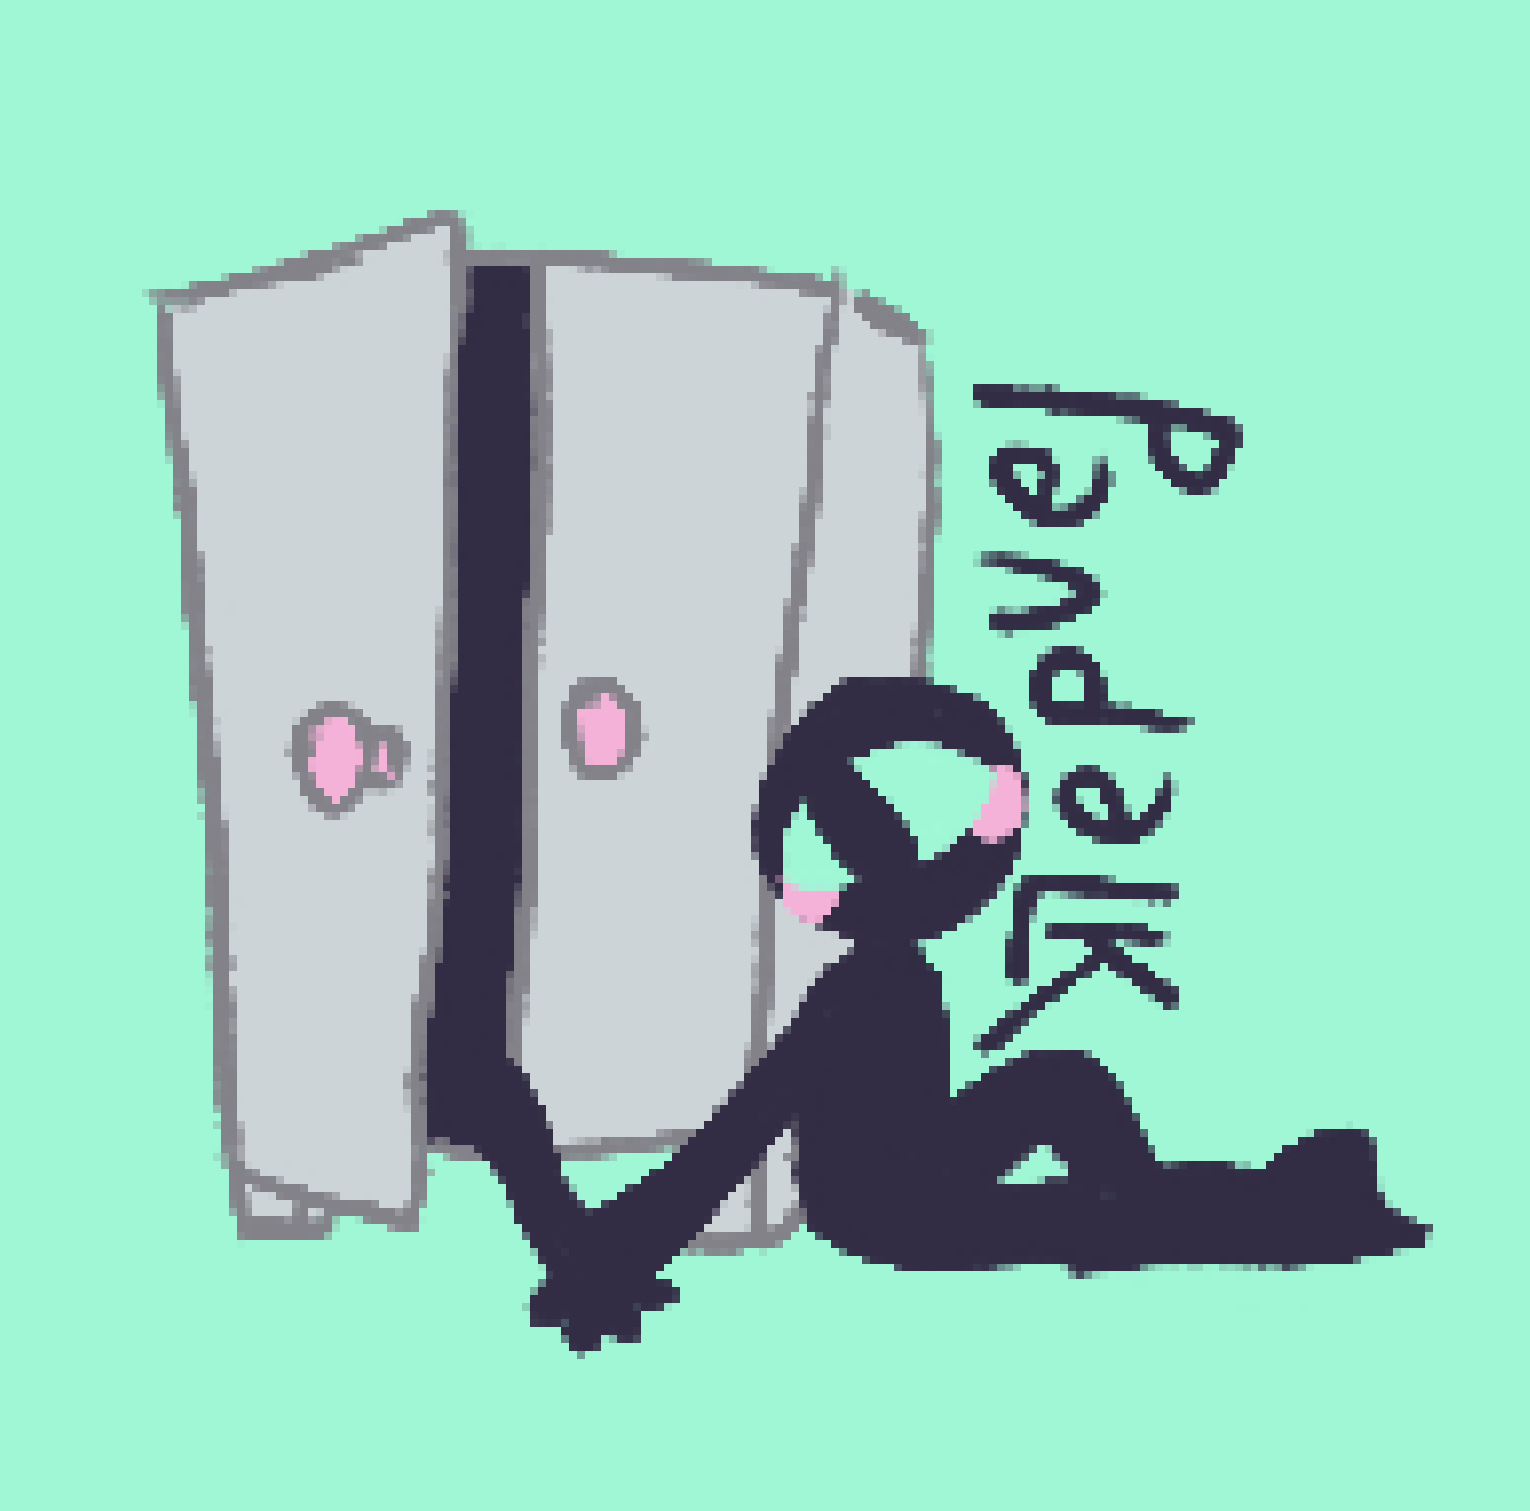 kappi on X: ok finally idrew something guys (its about my doors au and iys  about glitch sorry guys) #doorsroblox #robloxdoors   / X